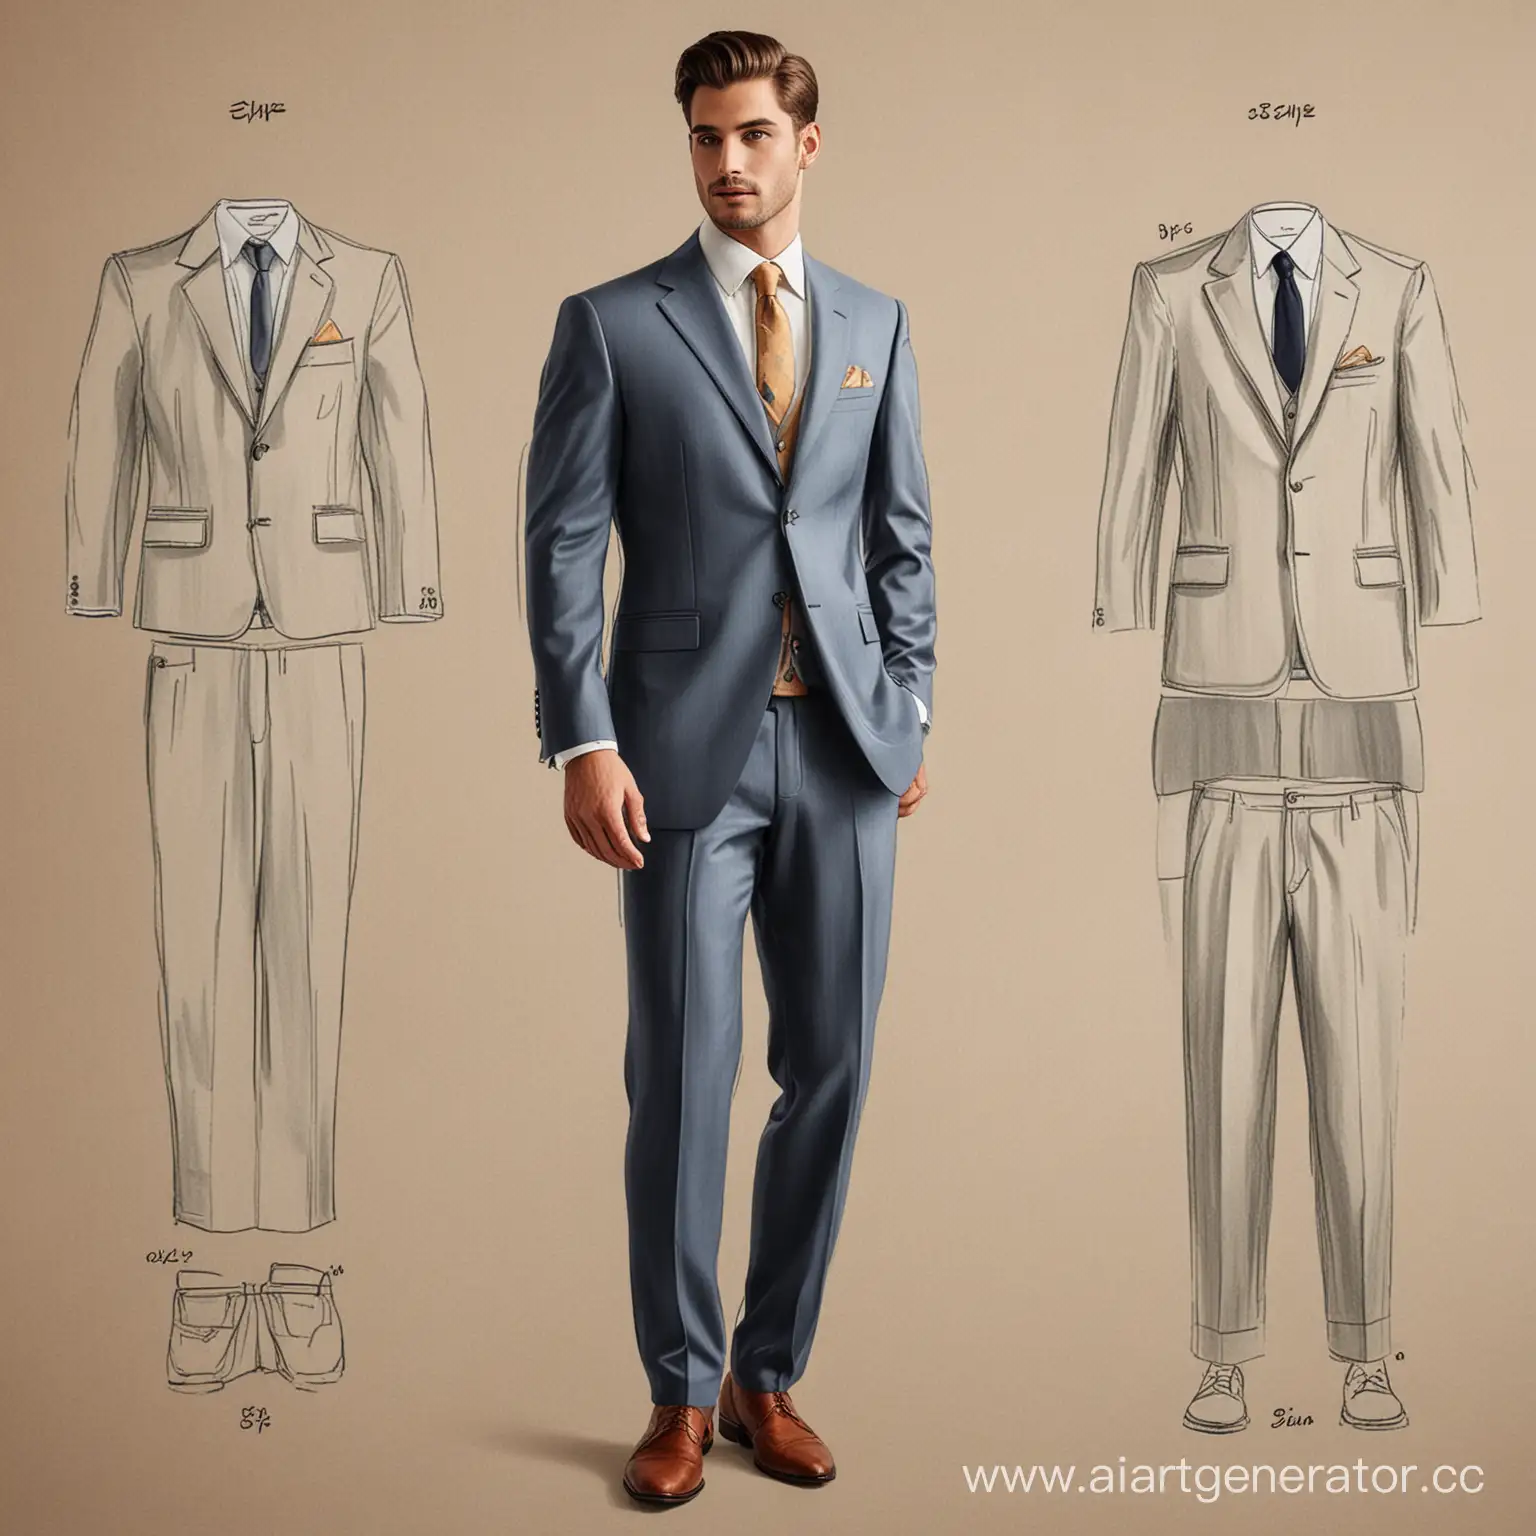 Classic-MiddleClass-Wedding-Suit-for-Mass-Consumers